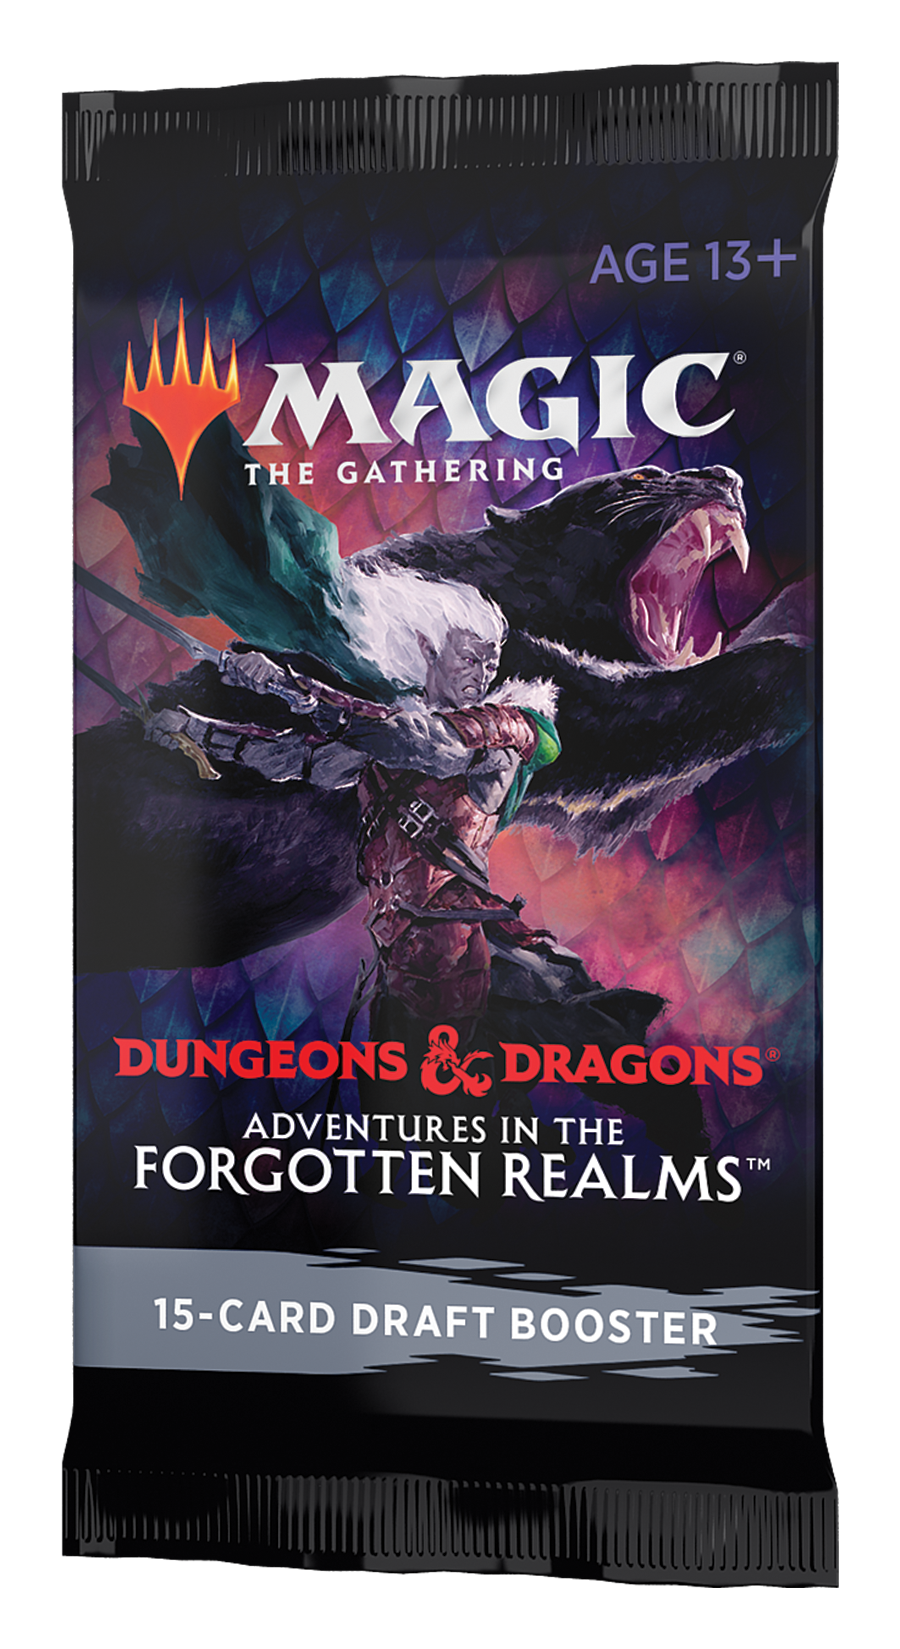 Dungeons & Dragons Adventures in the Forgotten Realms Draft Booster